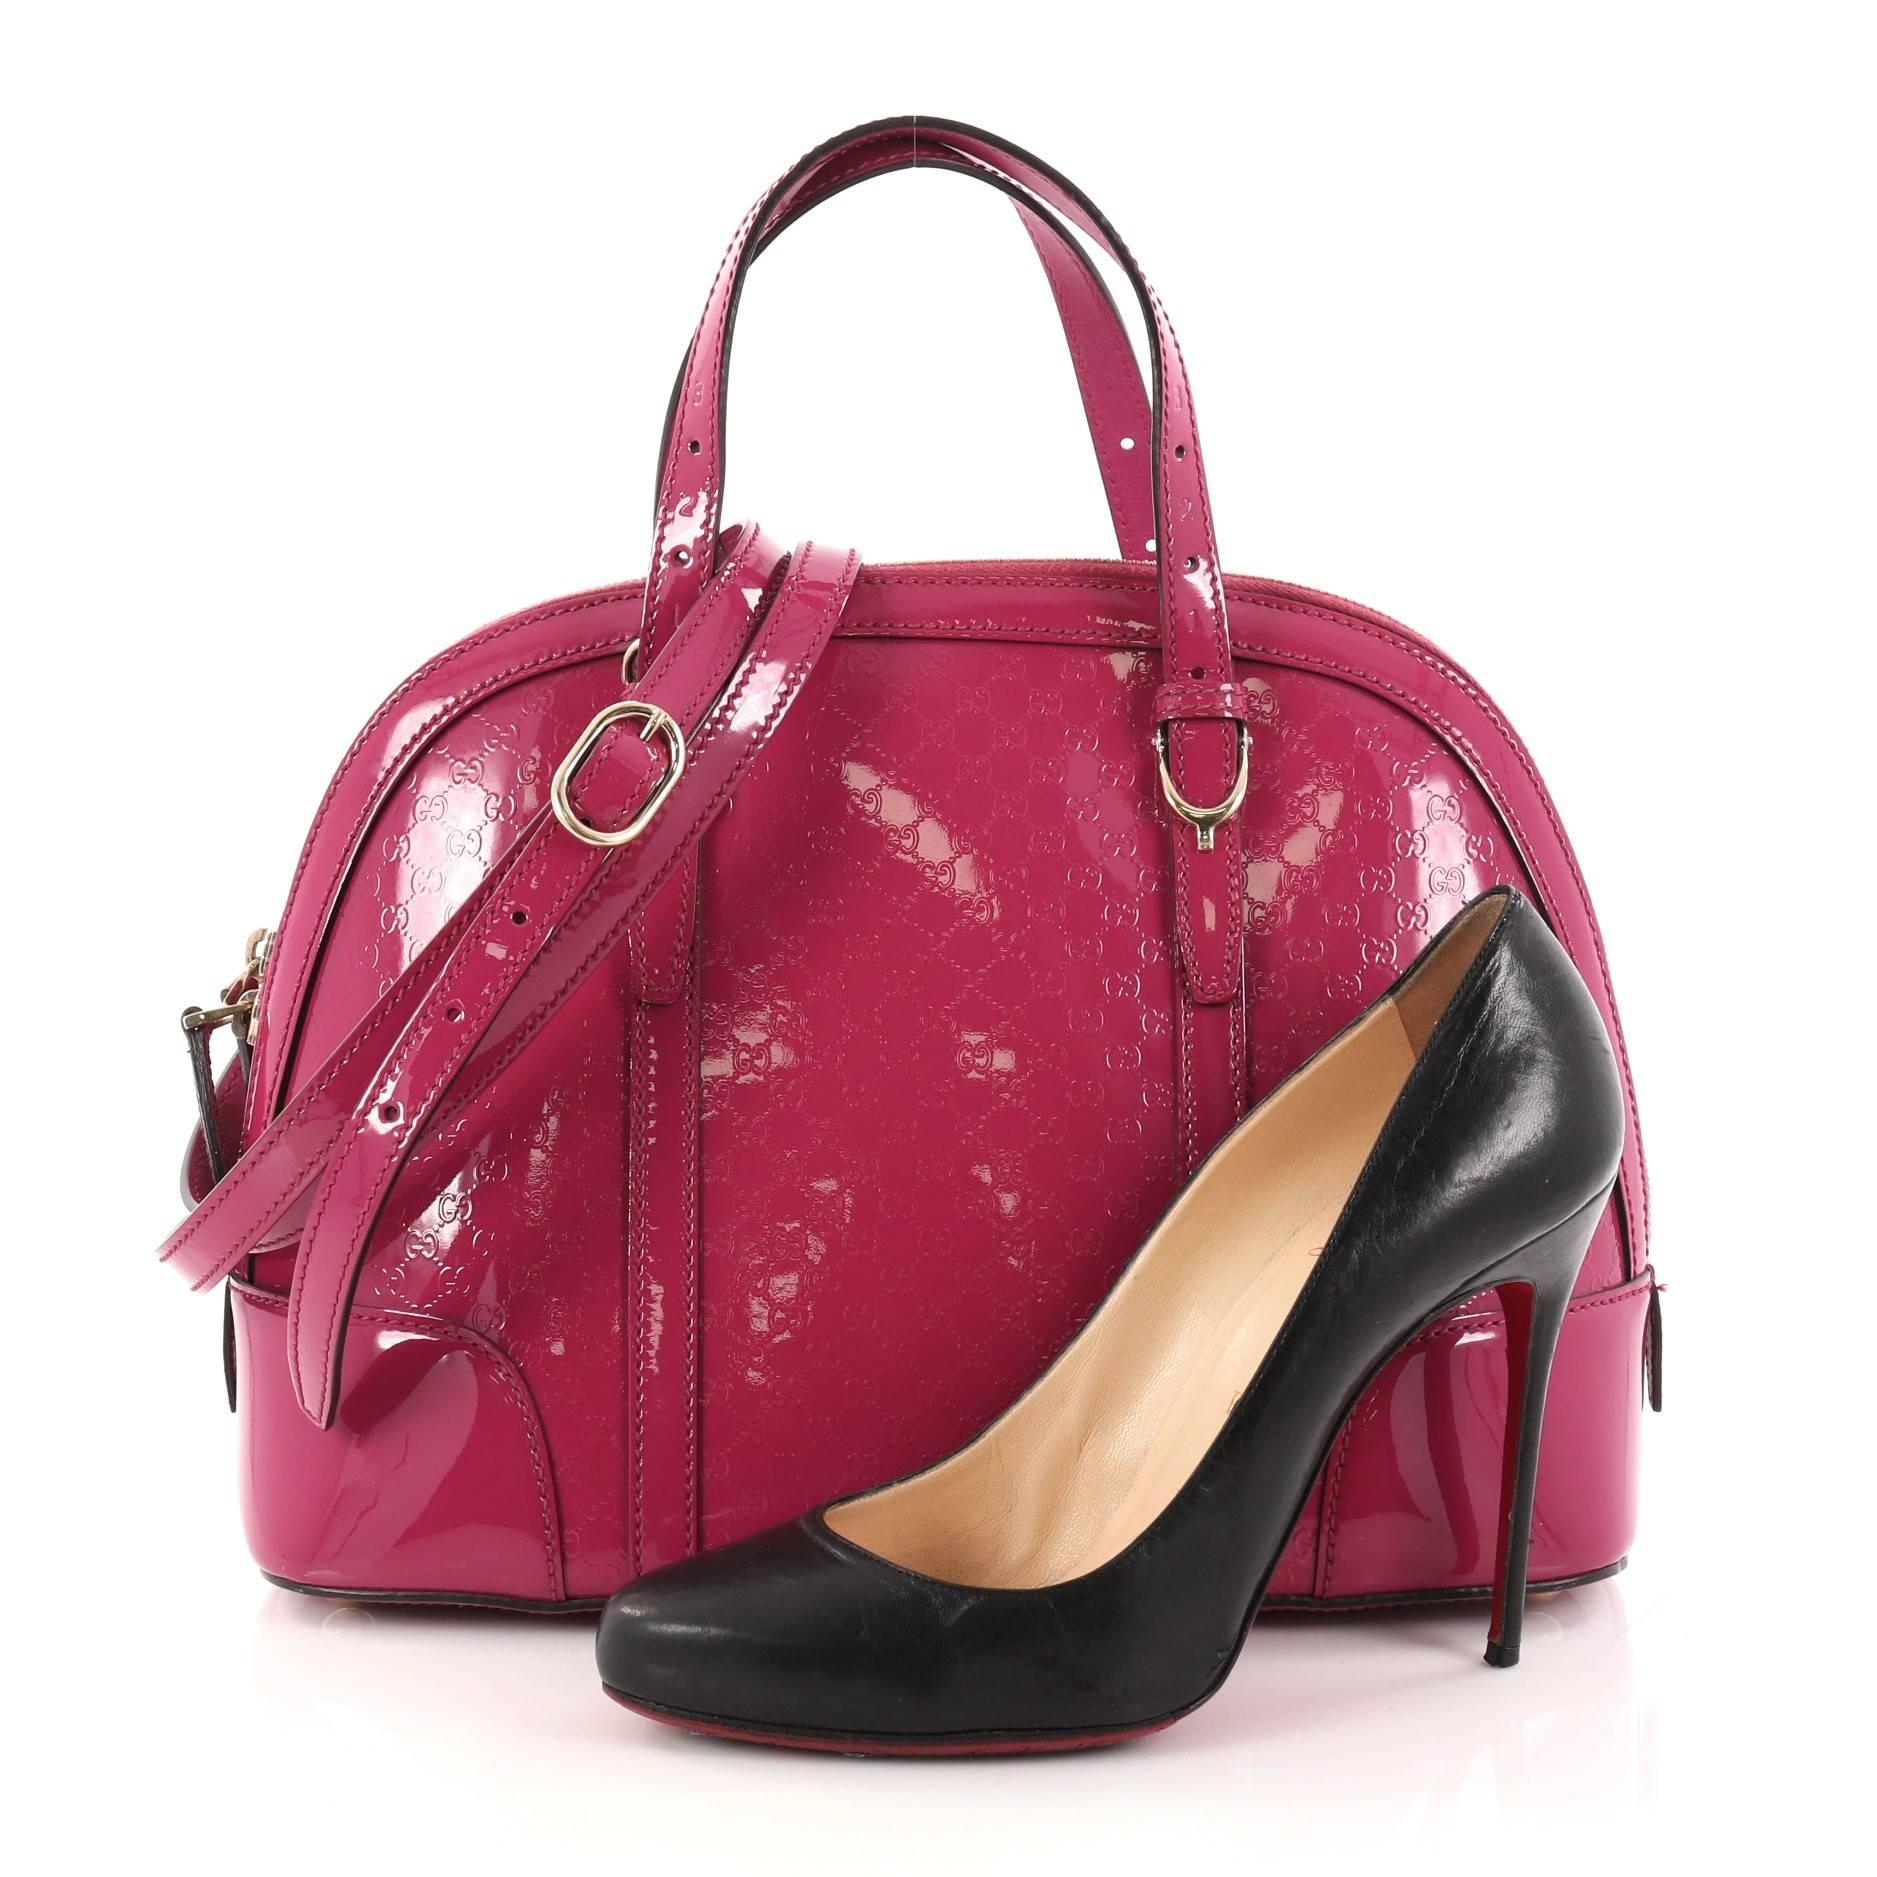 This authentic Gucci Nice Top Handle Bag Patent Microguccissima Leather Small is stylish in design perfect for modern fashionistas. Crafted in fuchsia patent microguccissima leather, this top handle bag from the brand's Nice Collection features